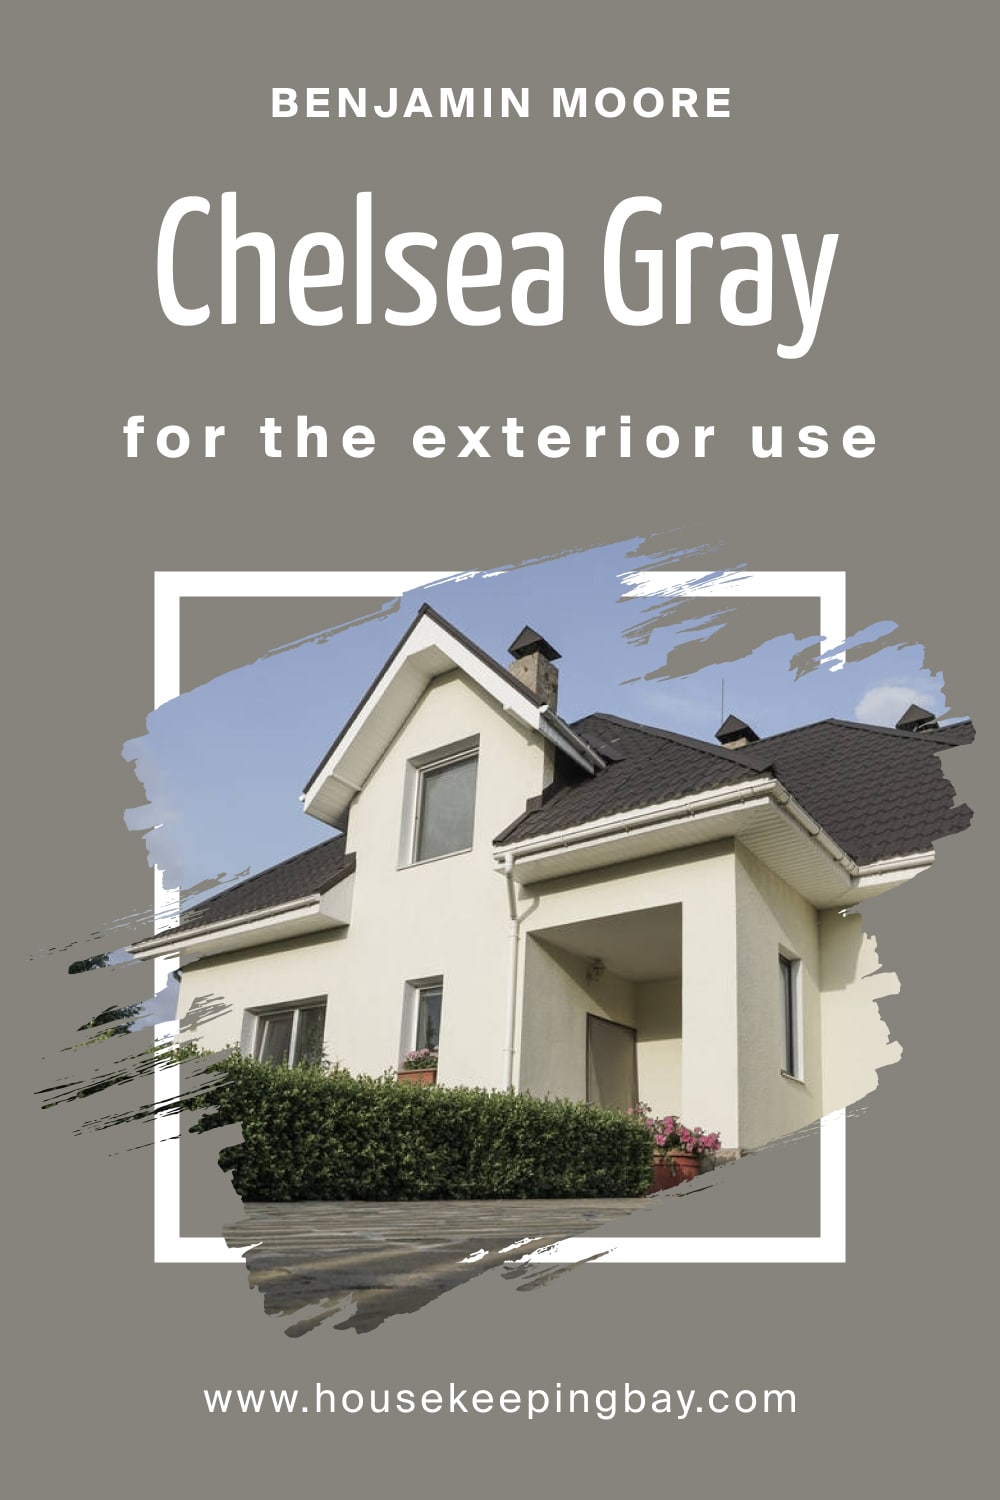 Benjamin Moore. Chelsea Gray HC 168 for the Exterior Use